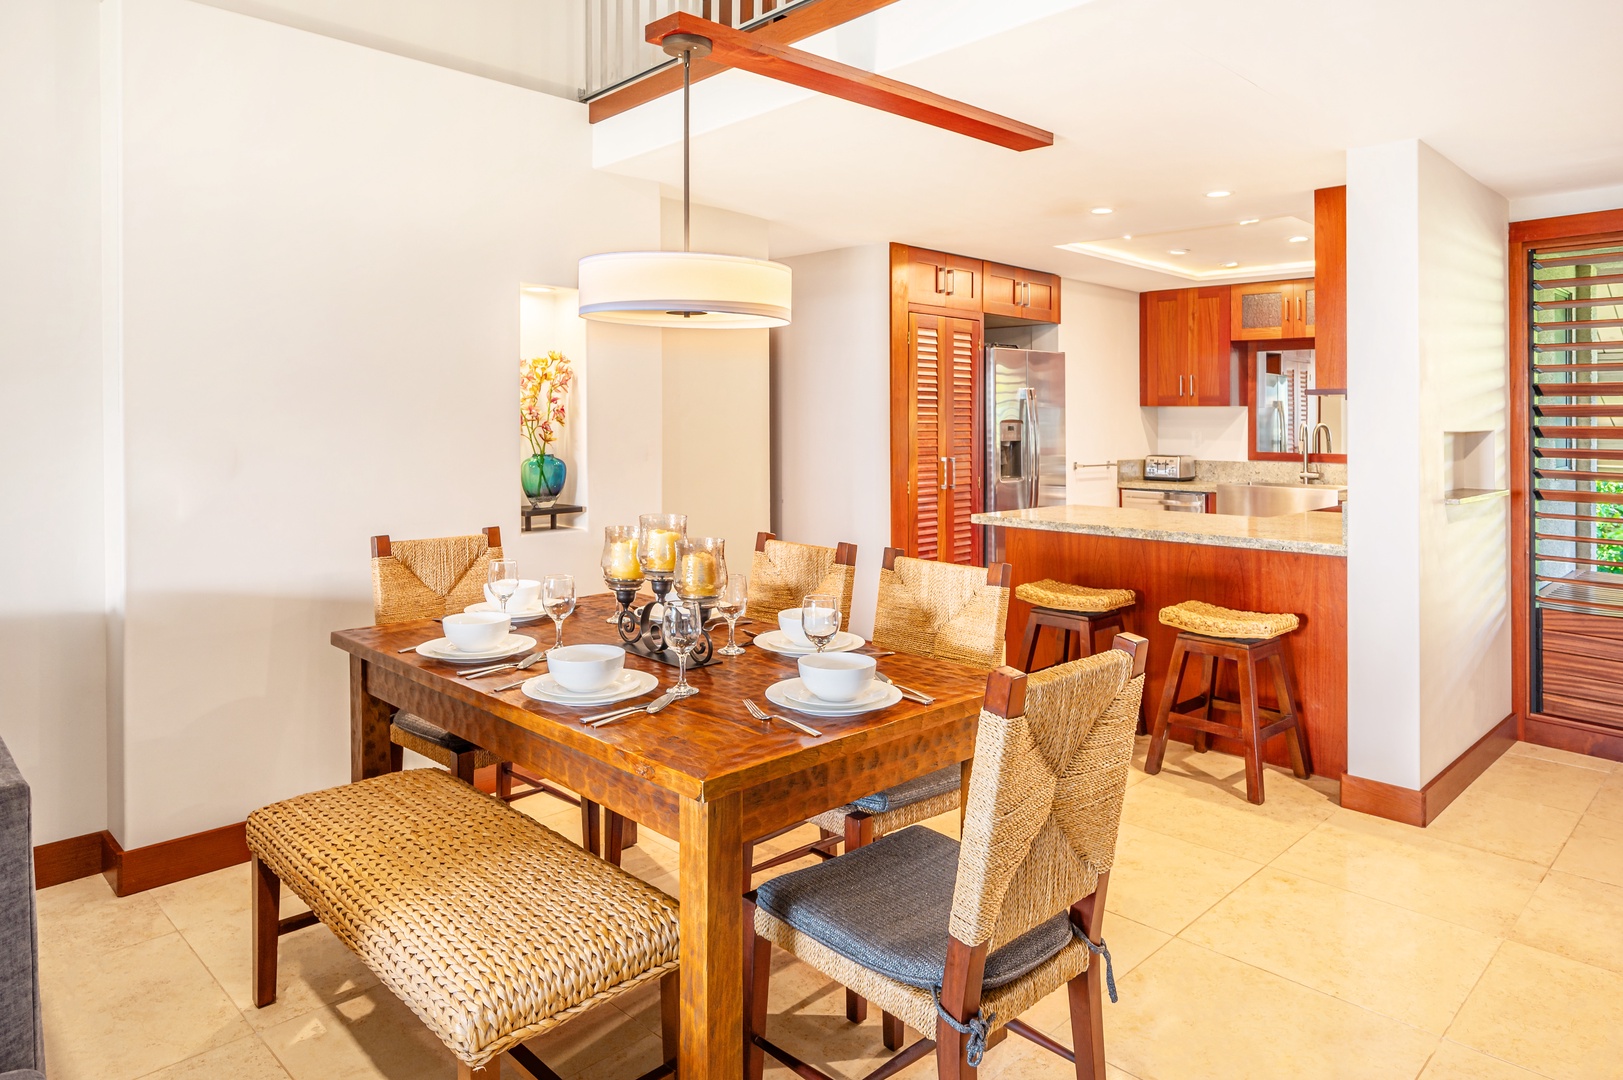 Princeville Vacation Rentals, Hanalei Bay Resort 7307/08 - Dining and kitchen share an open space